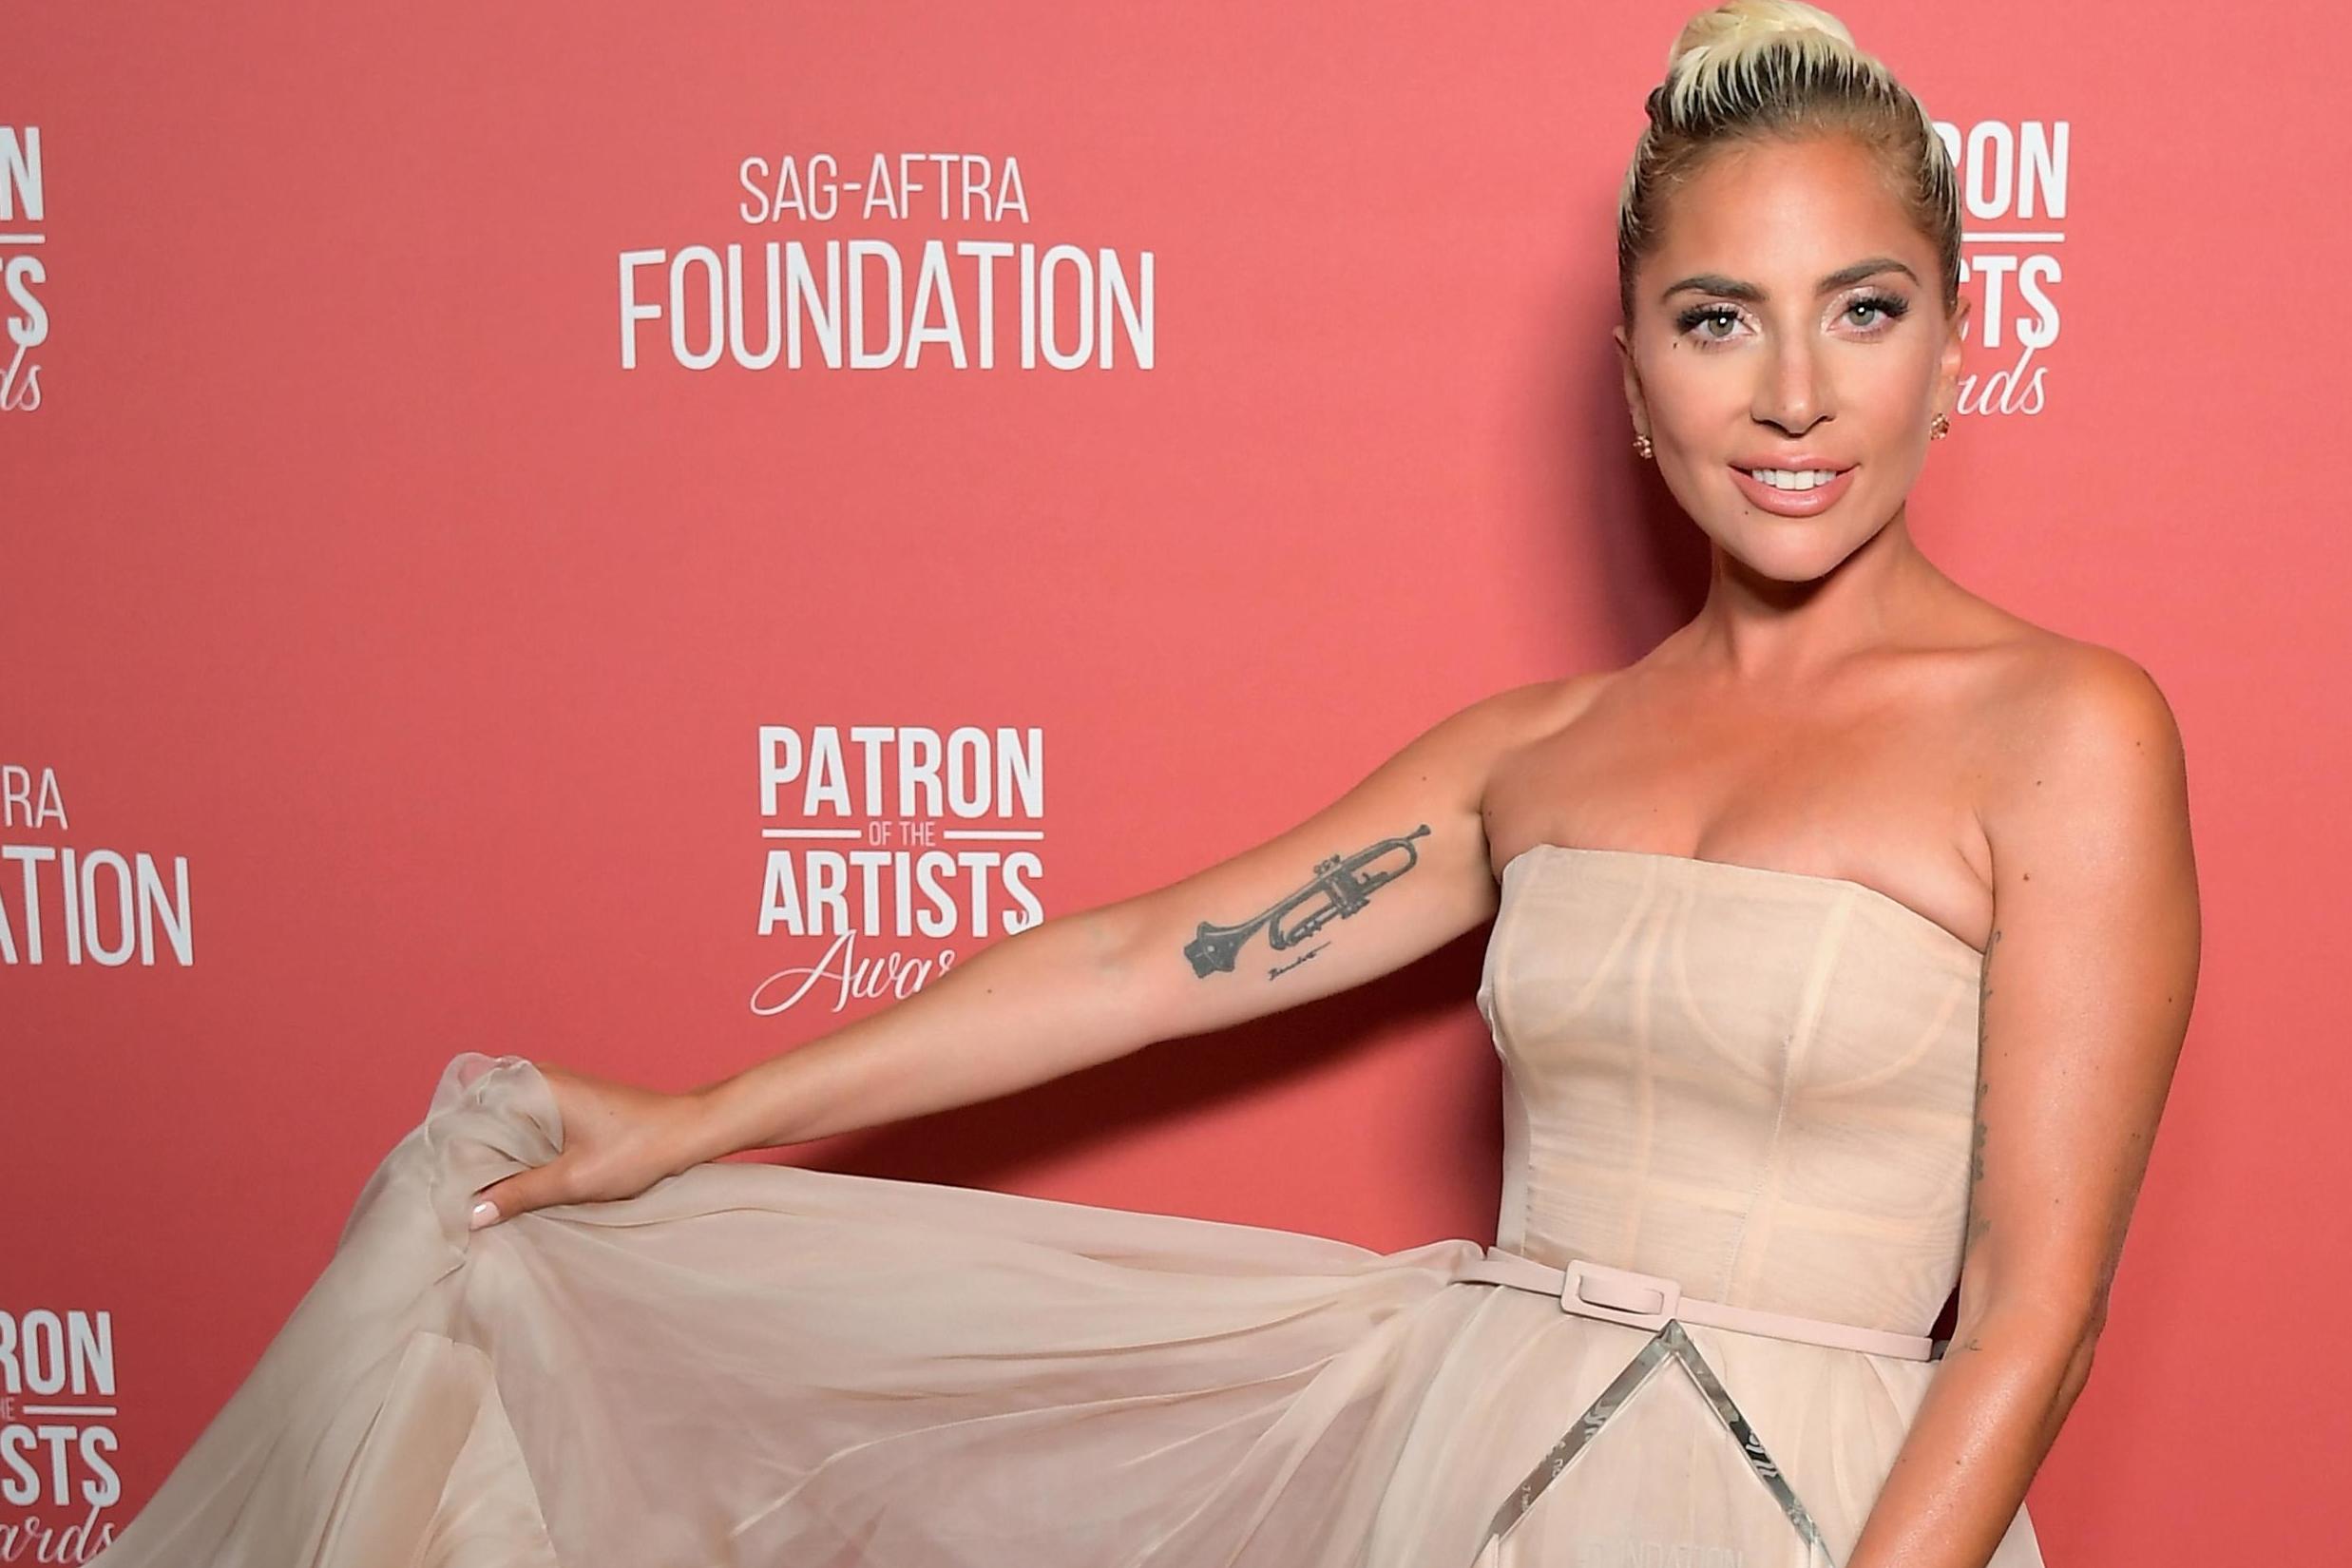 Artists Inspiration Award recipient Lady Gaga attends the SAG-AFTRA Foundation's 3rd Annual Patron of the Artists Awards at the Wallis Annenberg Center for the Performing Arts on 8 November, 2018 in Beverly Hills, California.